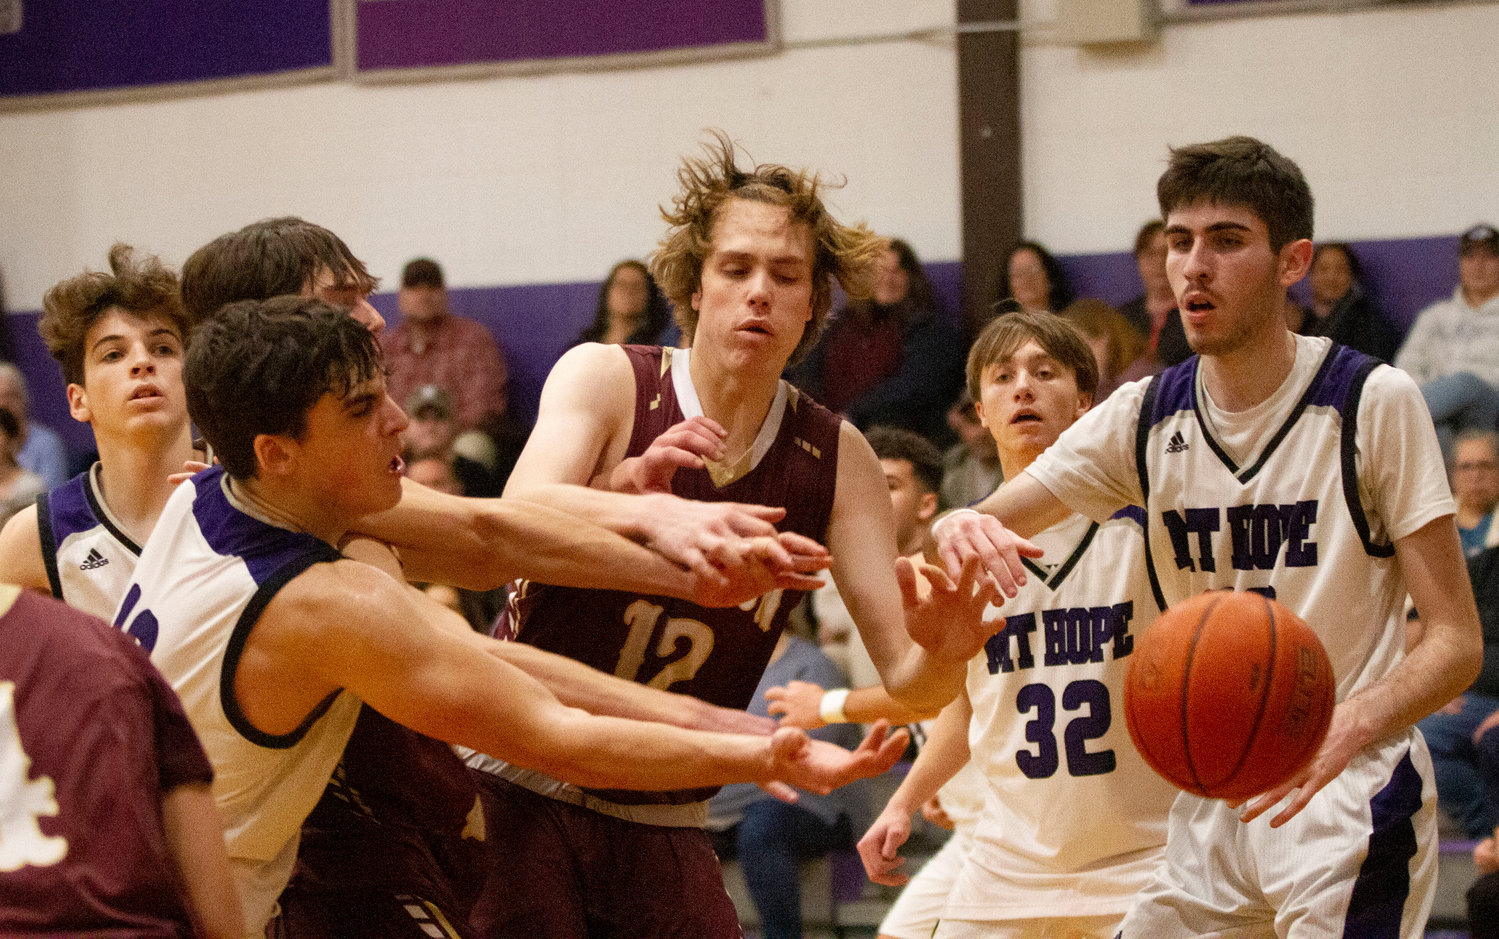 Ethan Santerre (left) and Lucas Andreozzi look on as Ben Calouro Jason Potvin and James Rustici vie for a rebound in a scrappy played game at Mt. Hope High School.